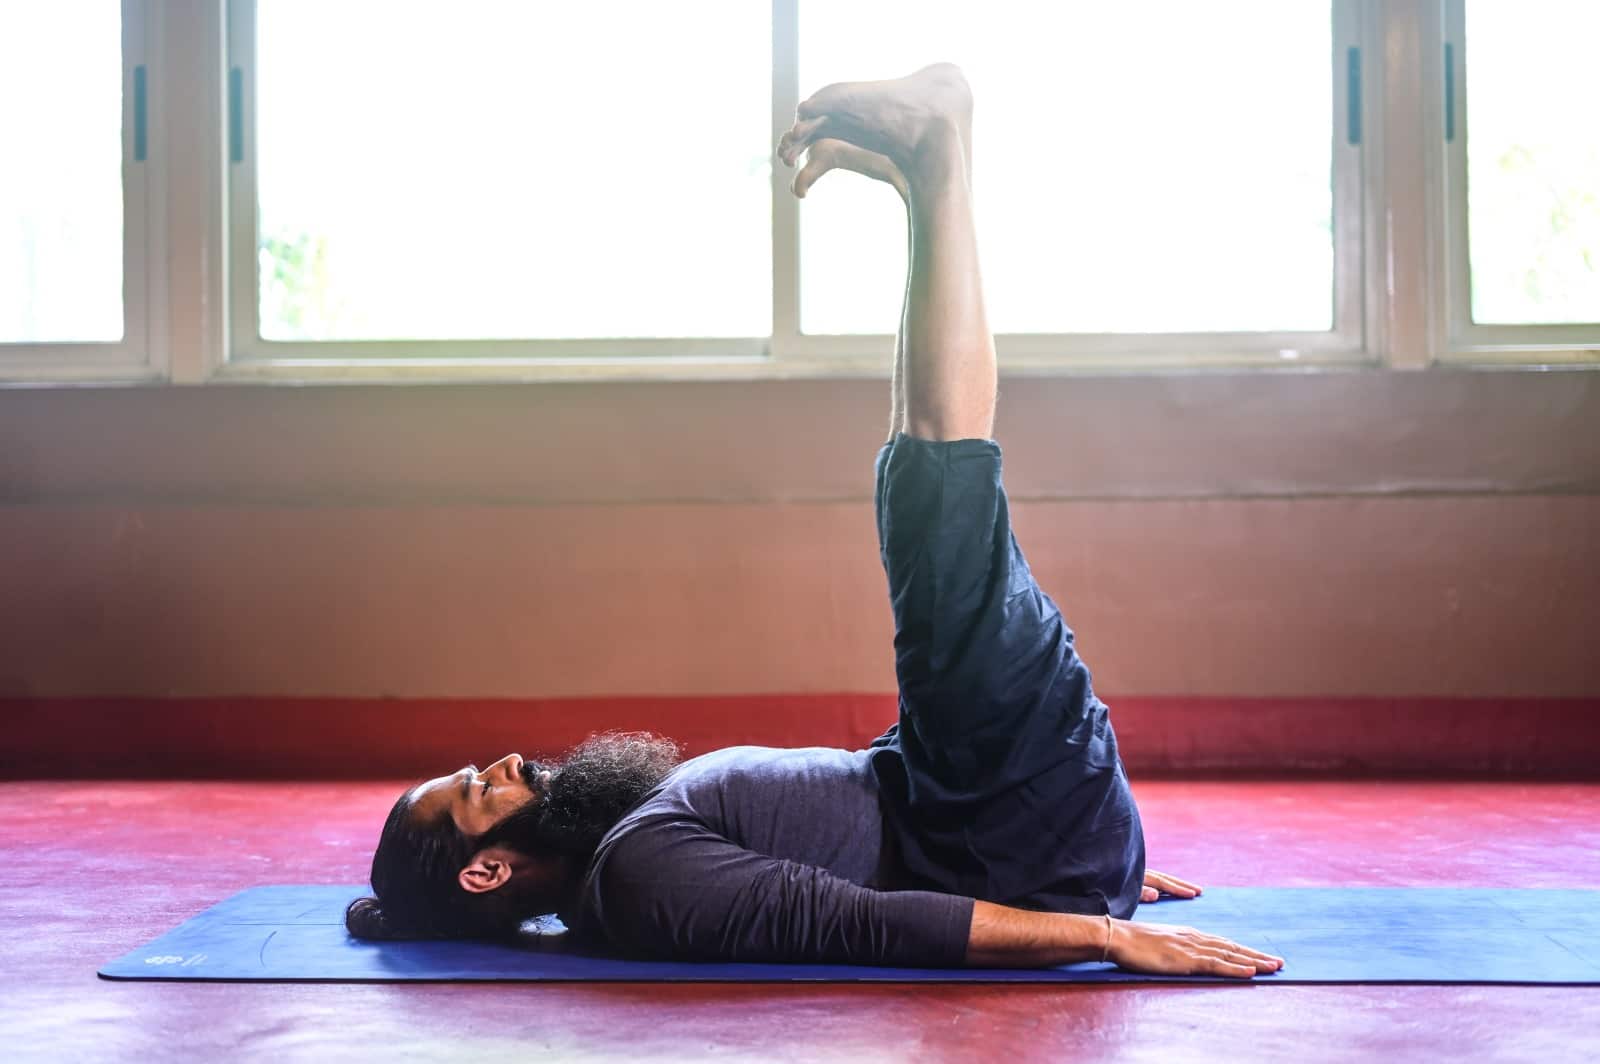 Healthy Street - 🔈 VIPARITA KARANI POSE - FOR LYMPH CIRCULATION, KNEE  PAIN, CONGESTED PELVIC ORGANS HOW TO DO IT? Stack a couple of folded  blankets on top of a bolster near